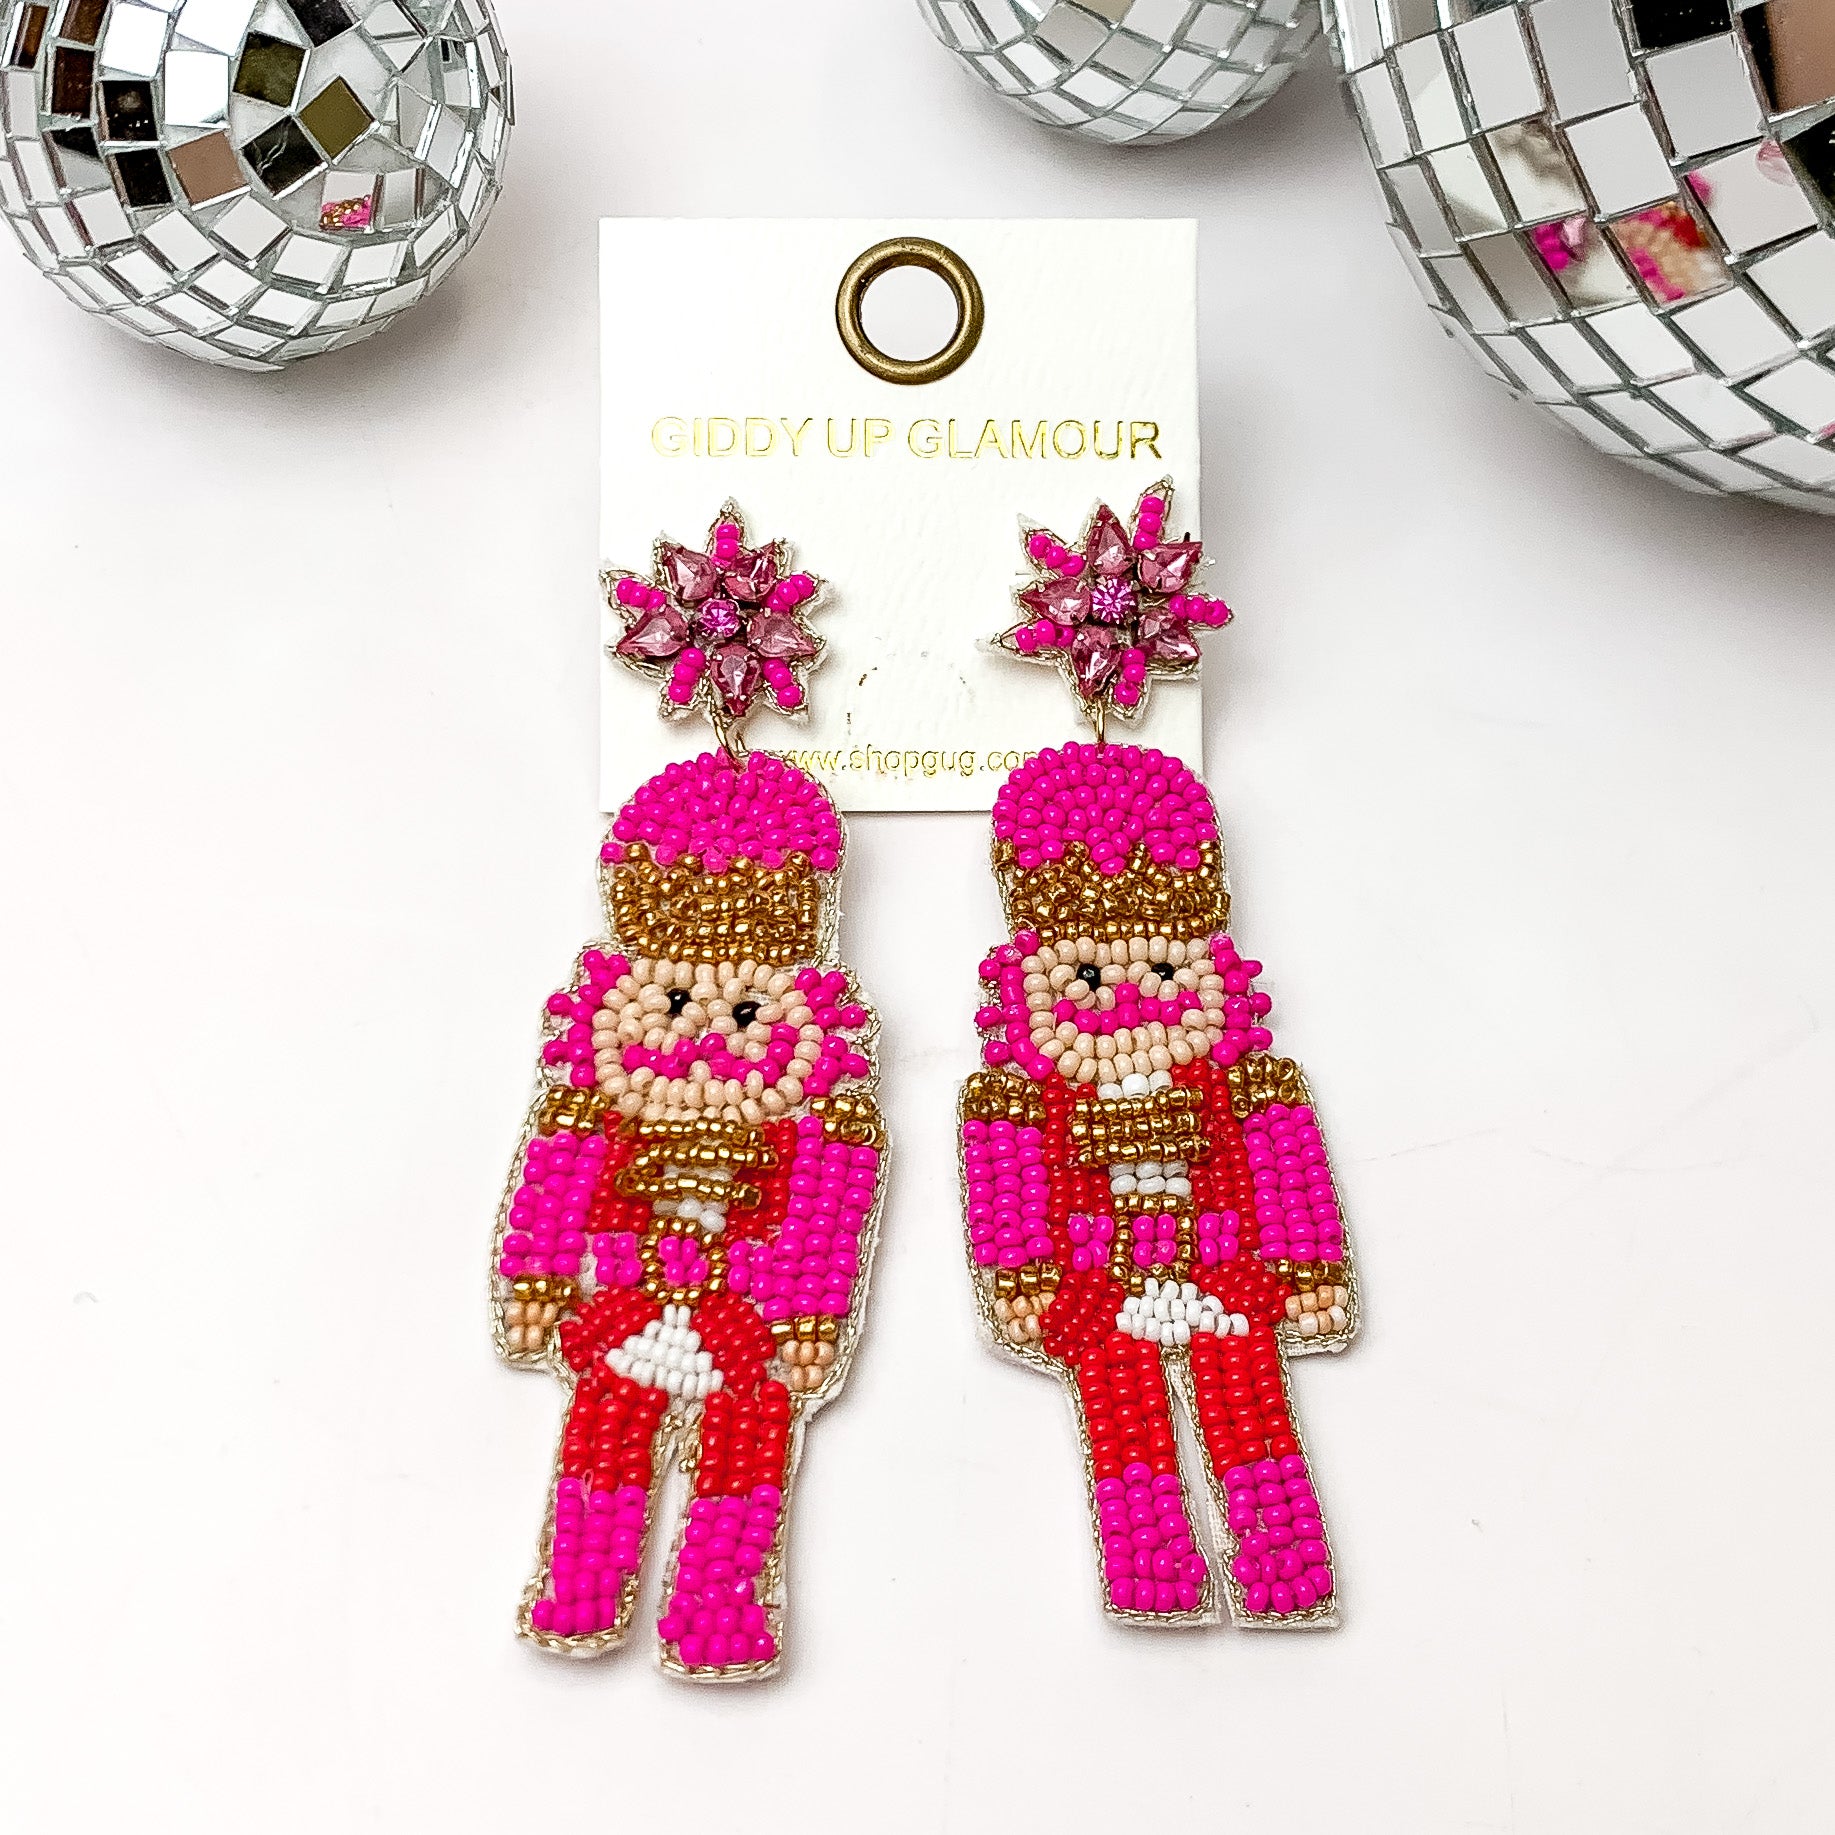 Beaded nutcracker earrings in red and pink. These earrings are pictured on a white background with disco balls at the top. 